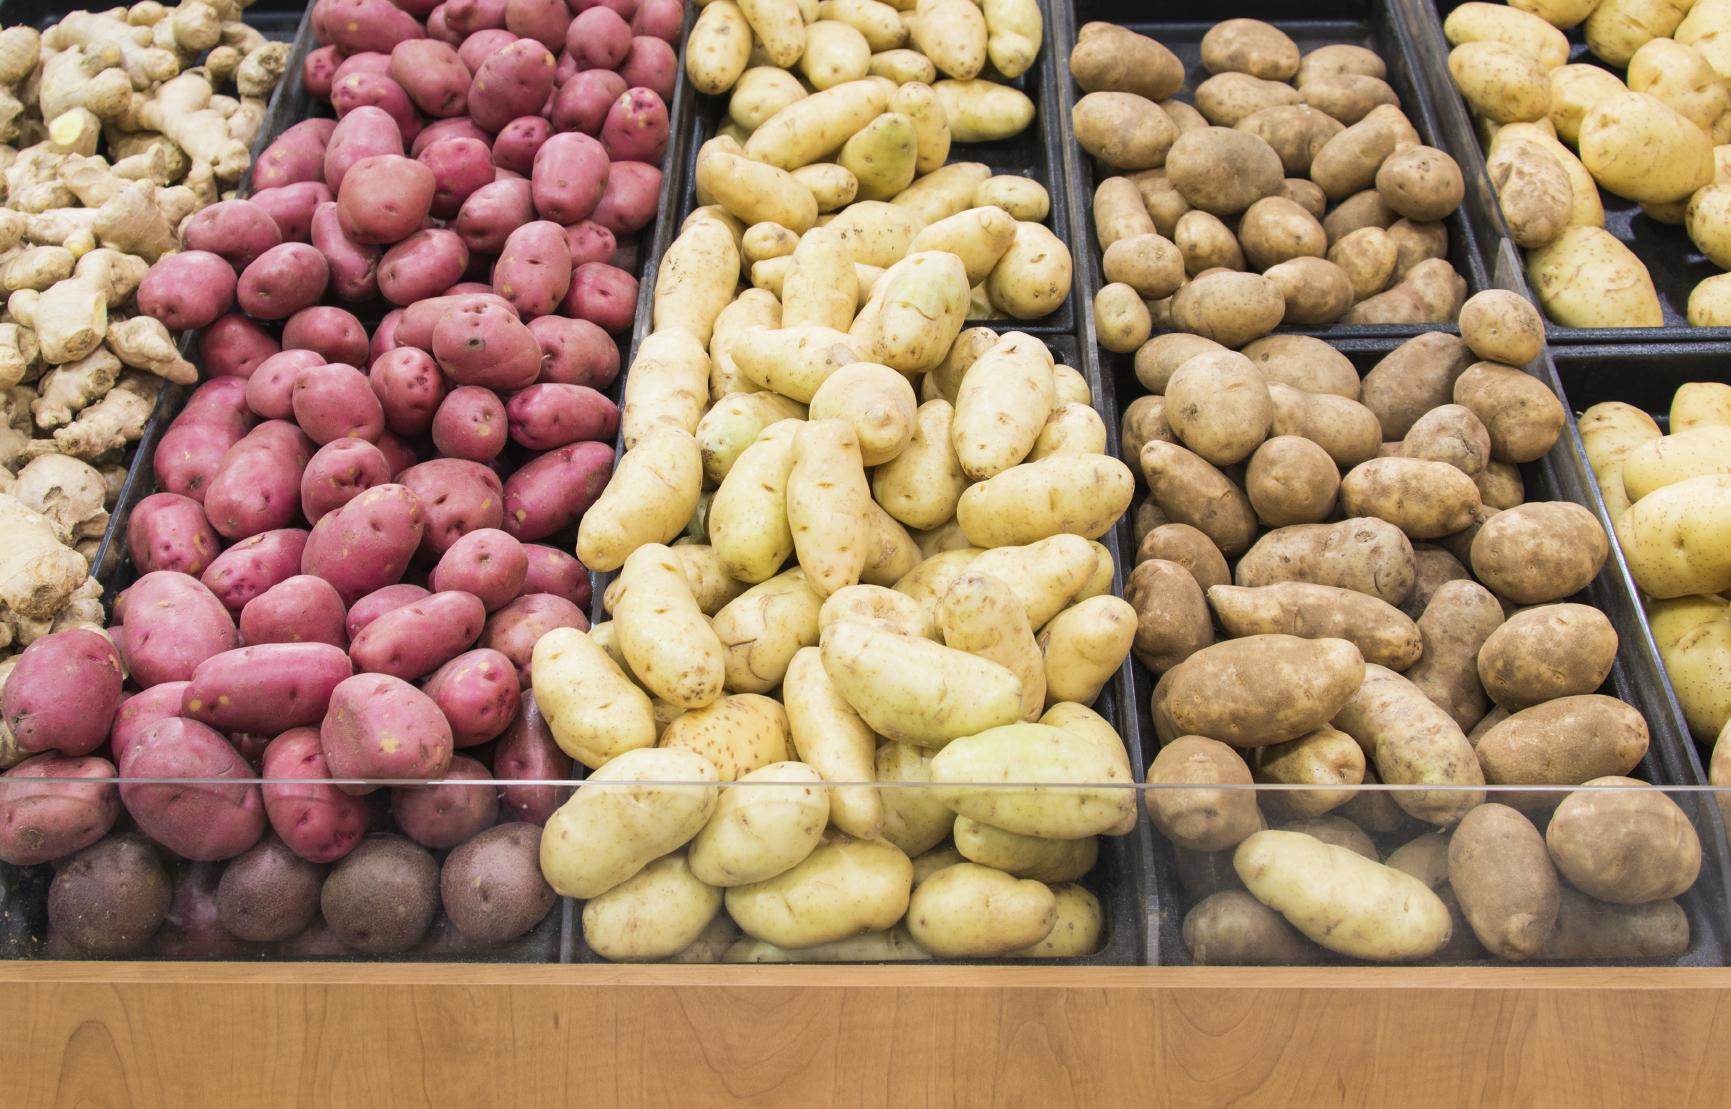 Different colors potatoes in a grocery store